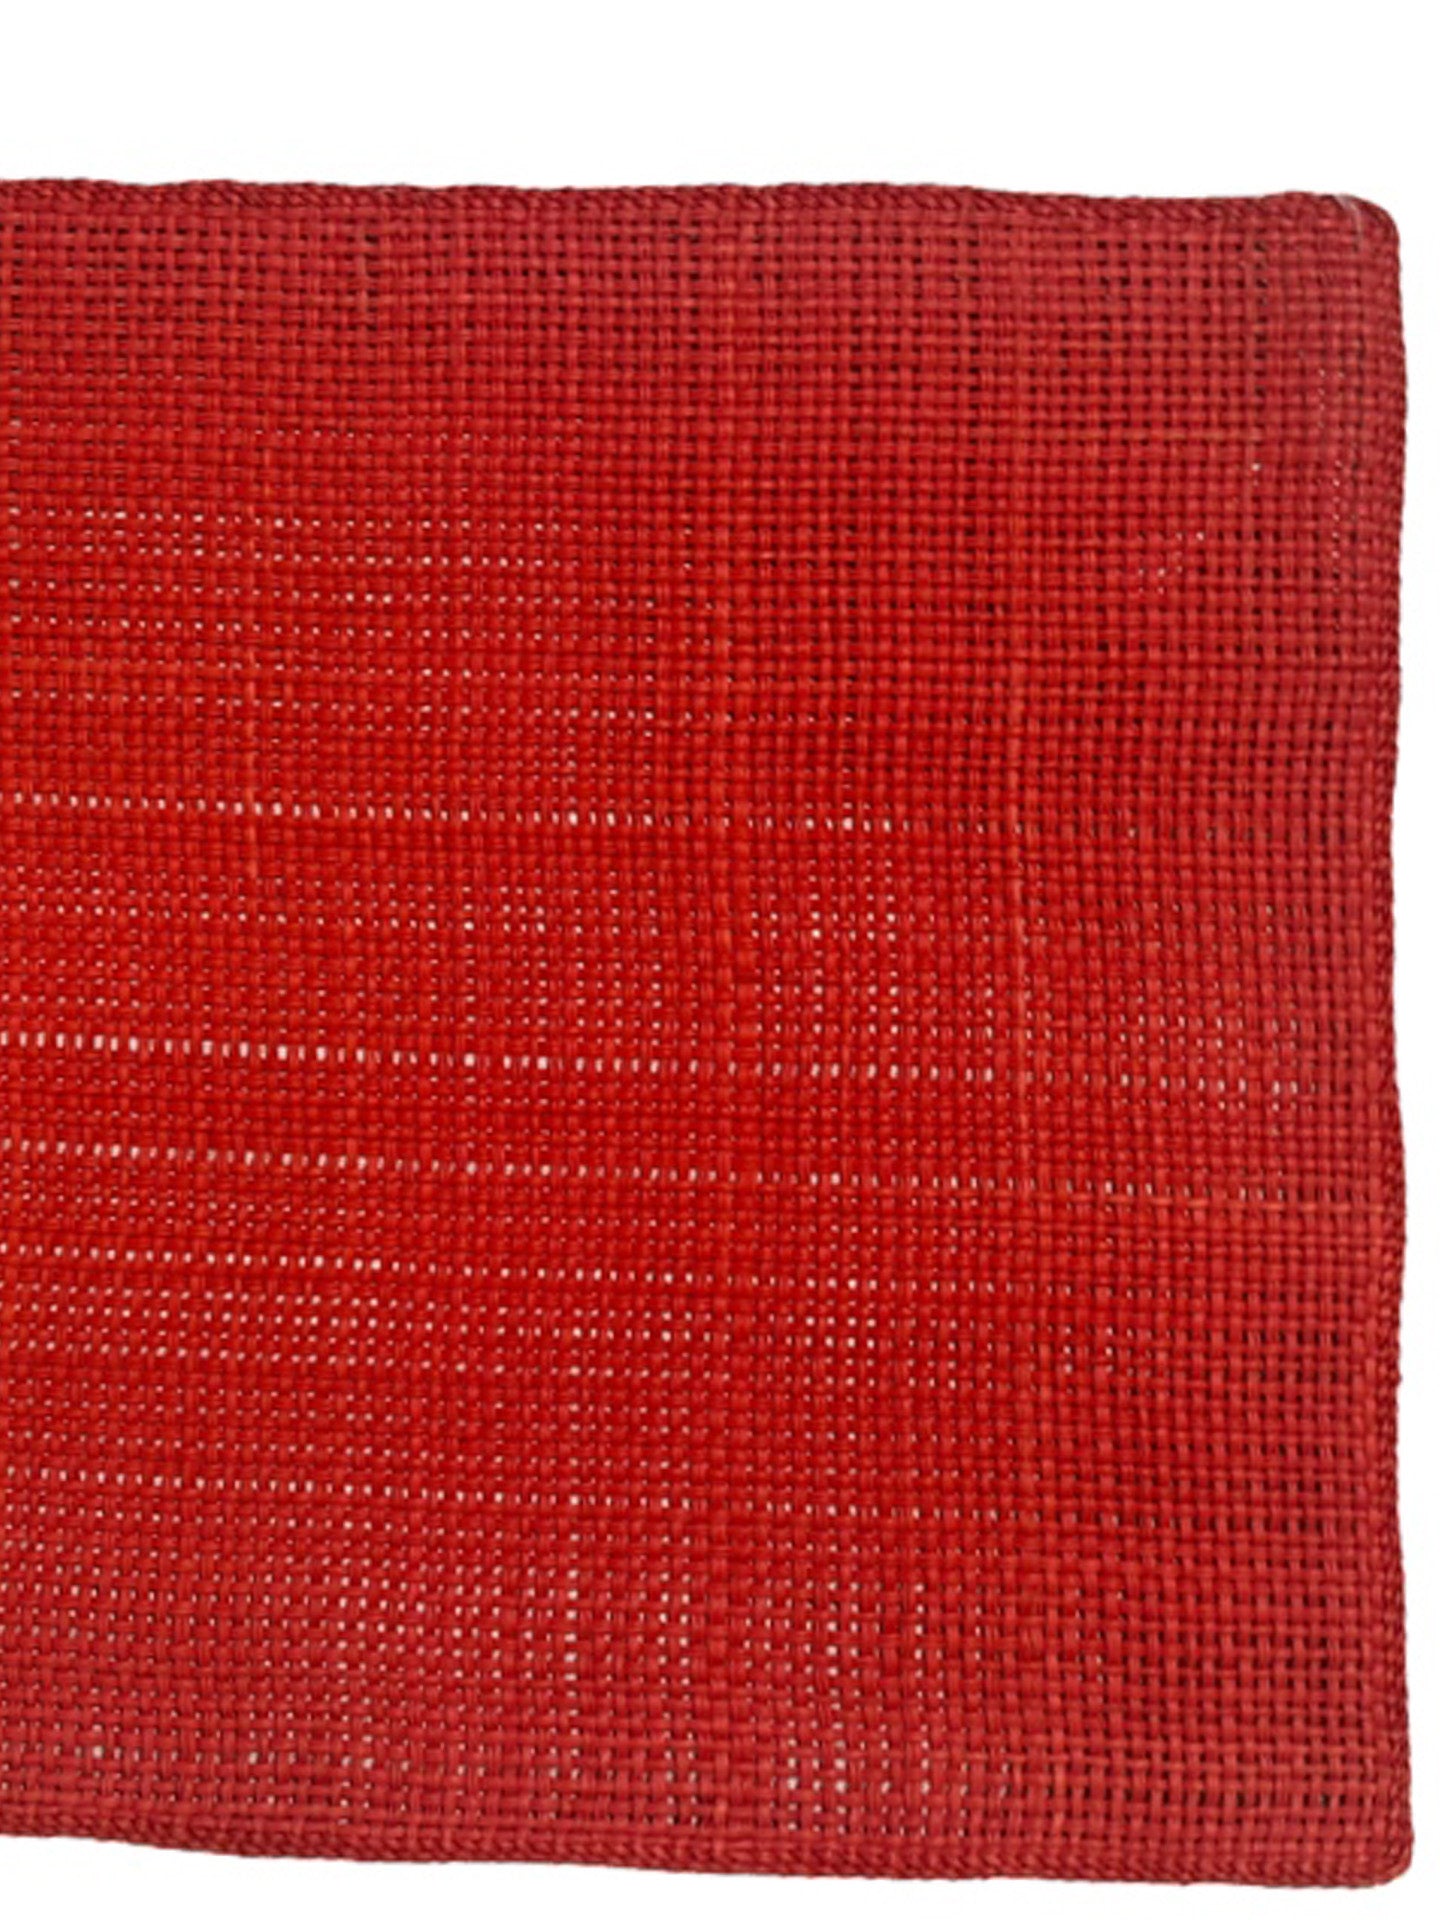 Straw placemat, red